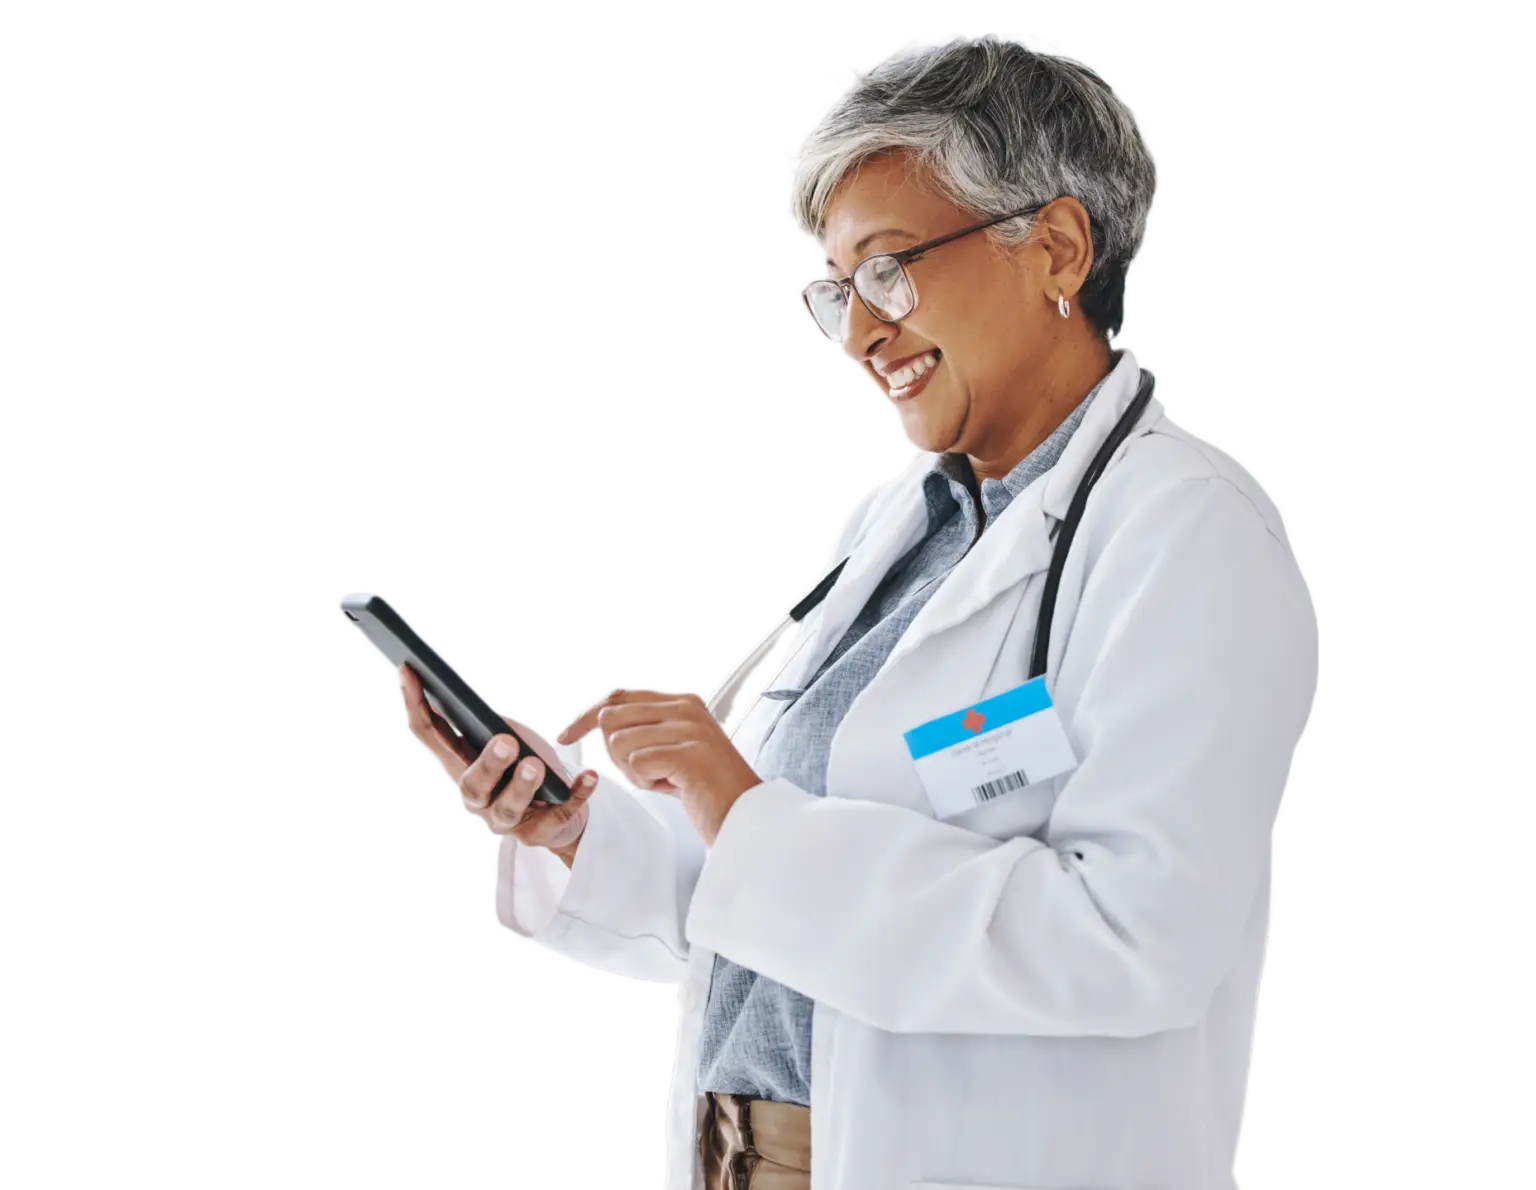 A nurse using a tablet in a healthcare setting, optimizing patient care and improving coordination among healthcare providers. This image highlights HUB Healthcare's user-friendly interface designed to streamline workflows, enhance communication, and manage clinical pathways, materials, and patient scheduling efficiently